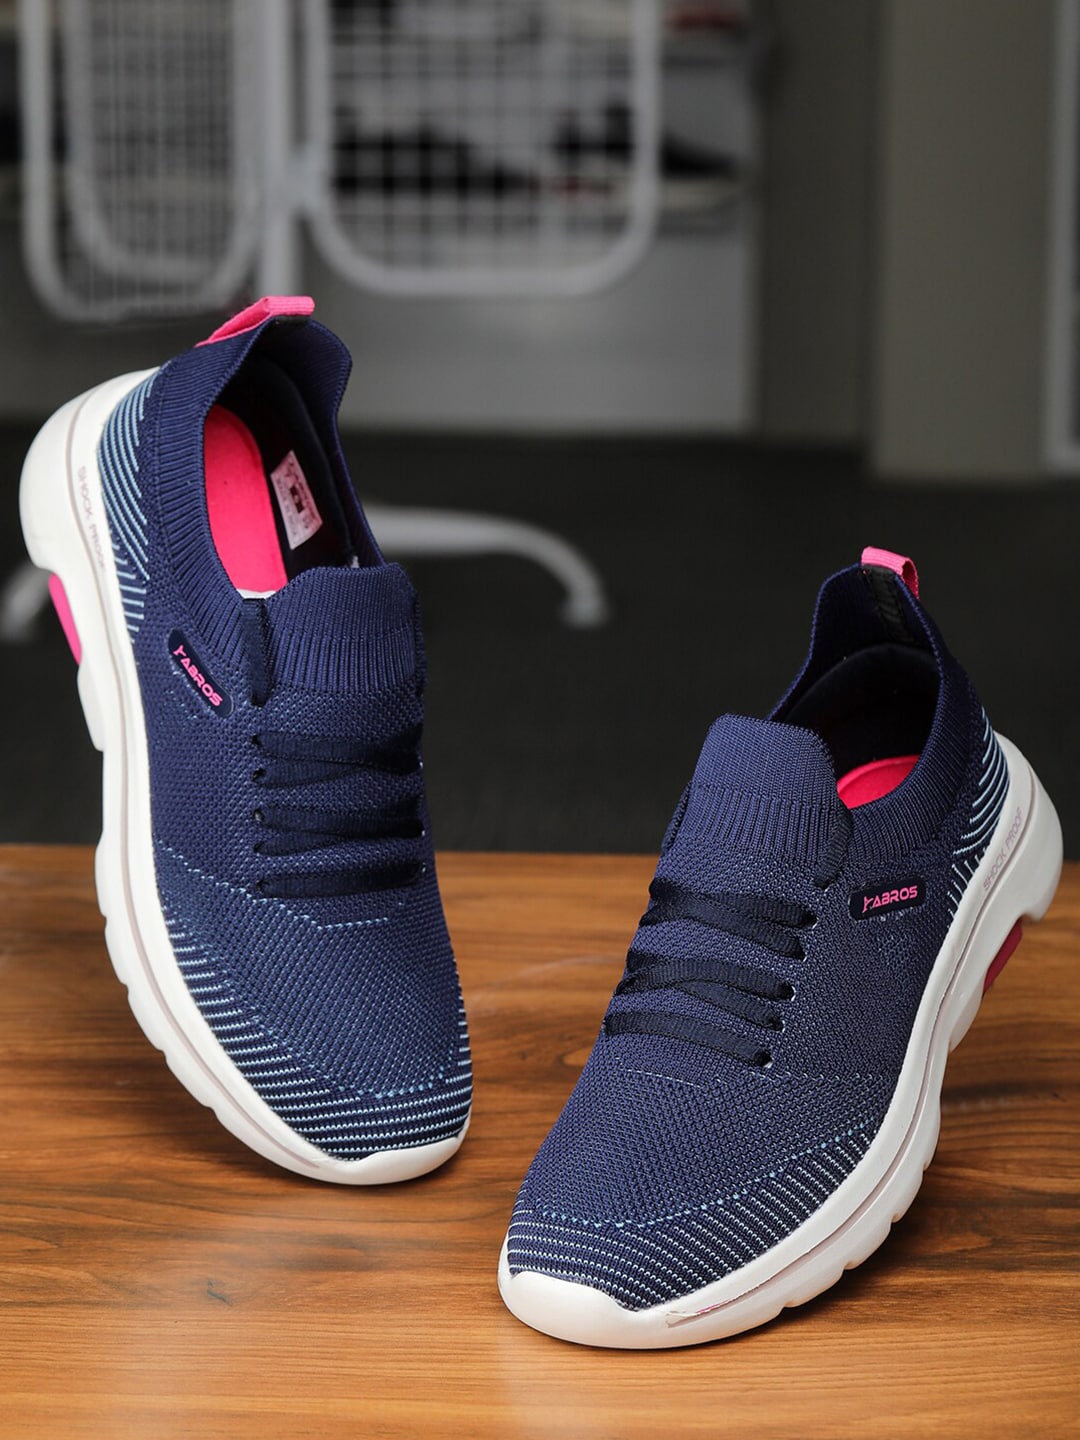 ABROS Women Navy Blue & Pink Mesh Running Sports Shoes Price in India